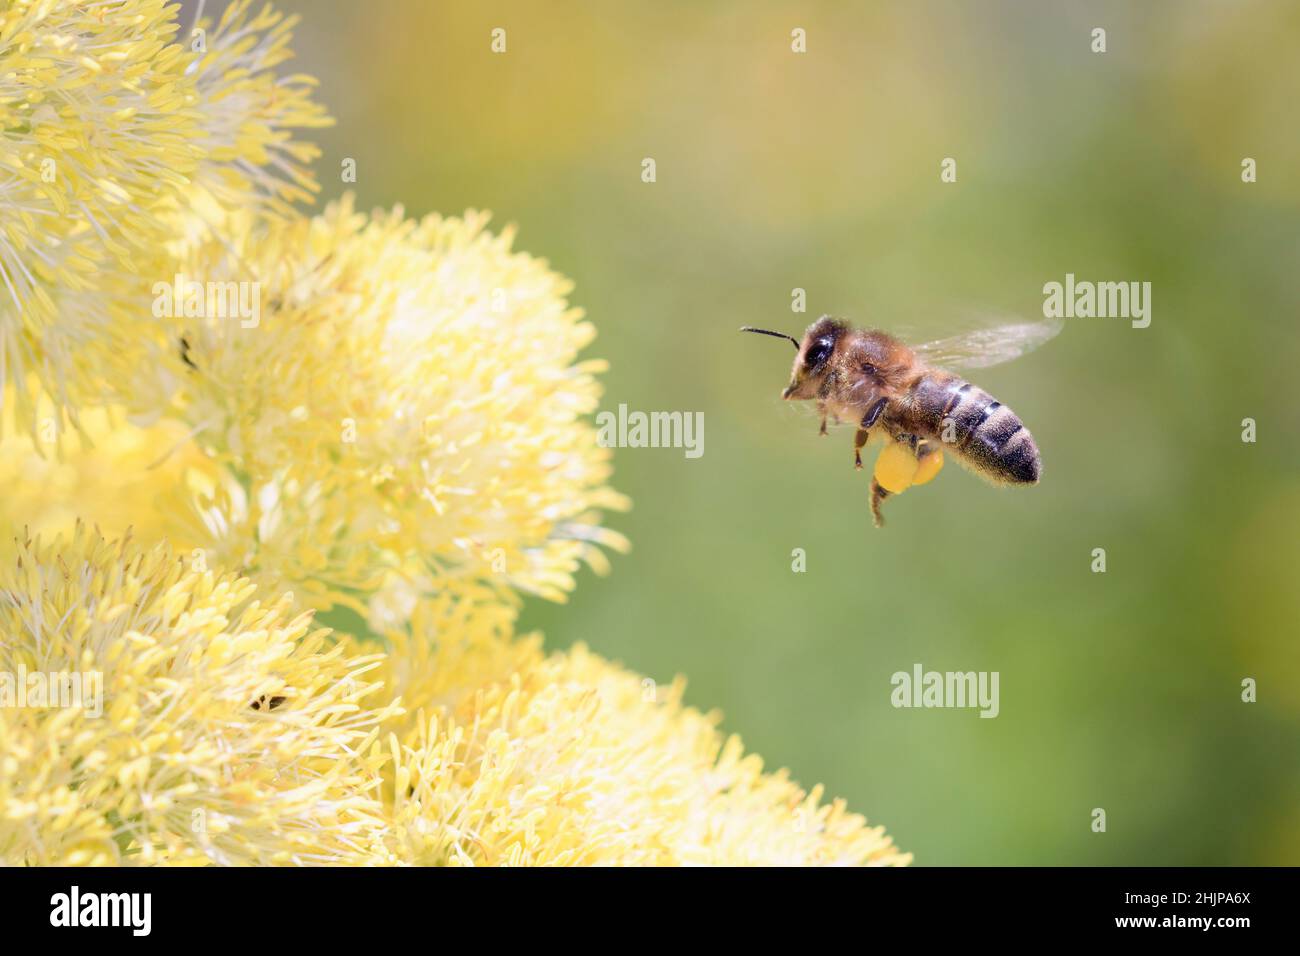 Bee - Apis mellifera - pollinates a blossom of the common meadow-rue, also known as poor man's rhubarb or yellow meadow-rue  - Thalictrum flavum Stock Photo